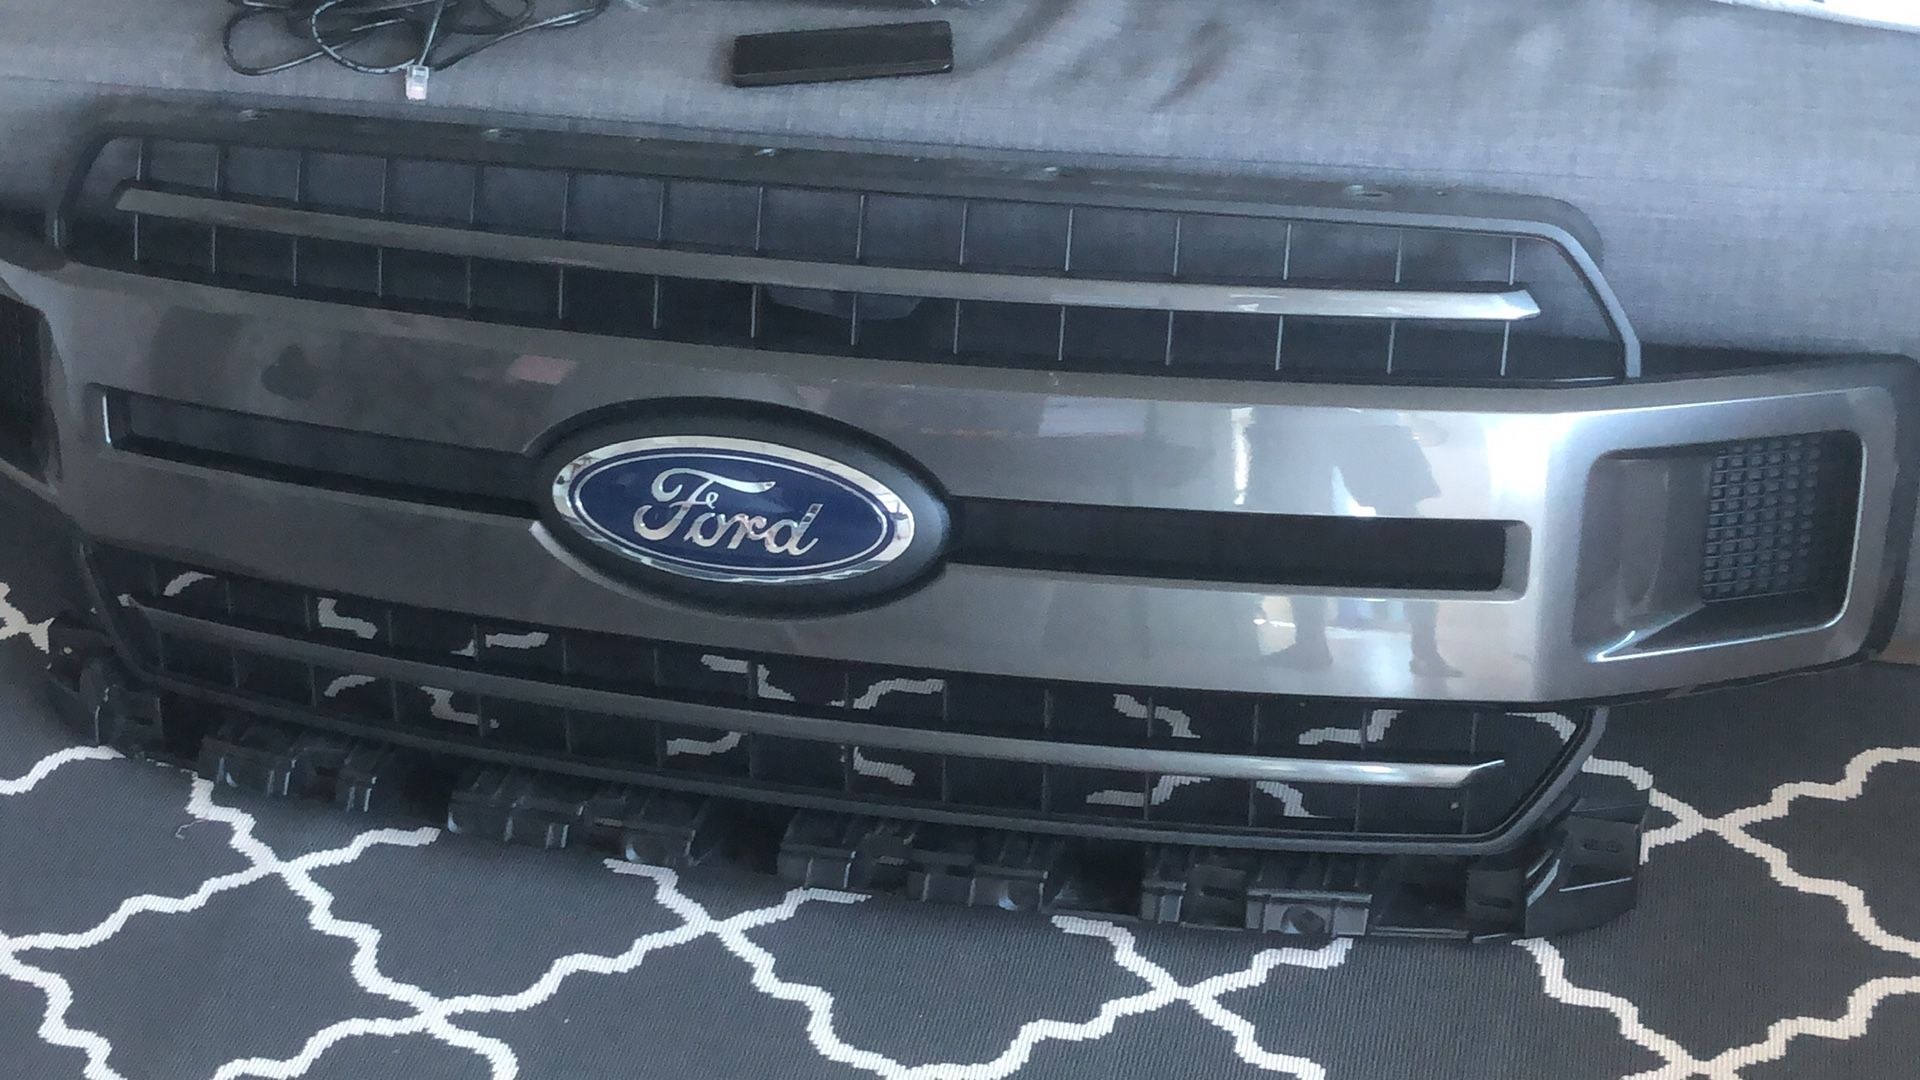 OEM 2018 F150 Grille - Ford F-150 parts